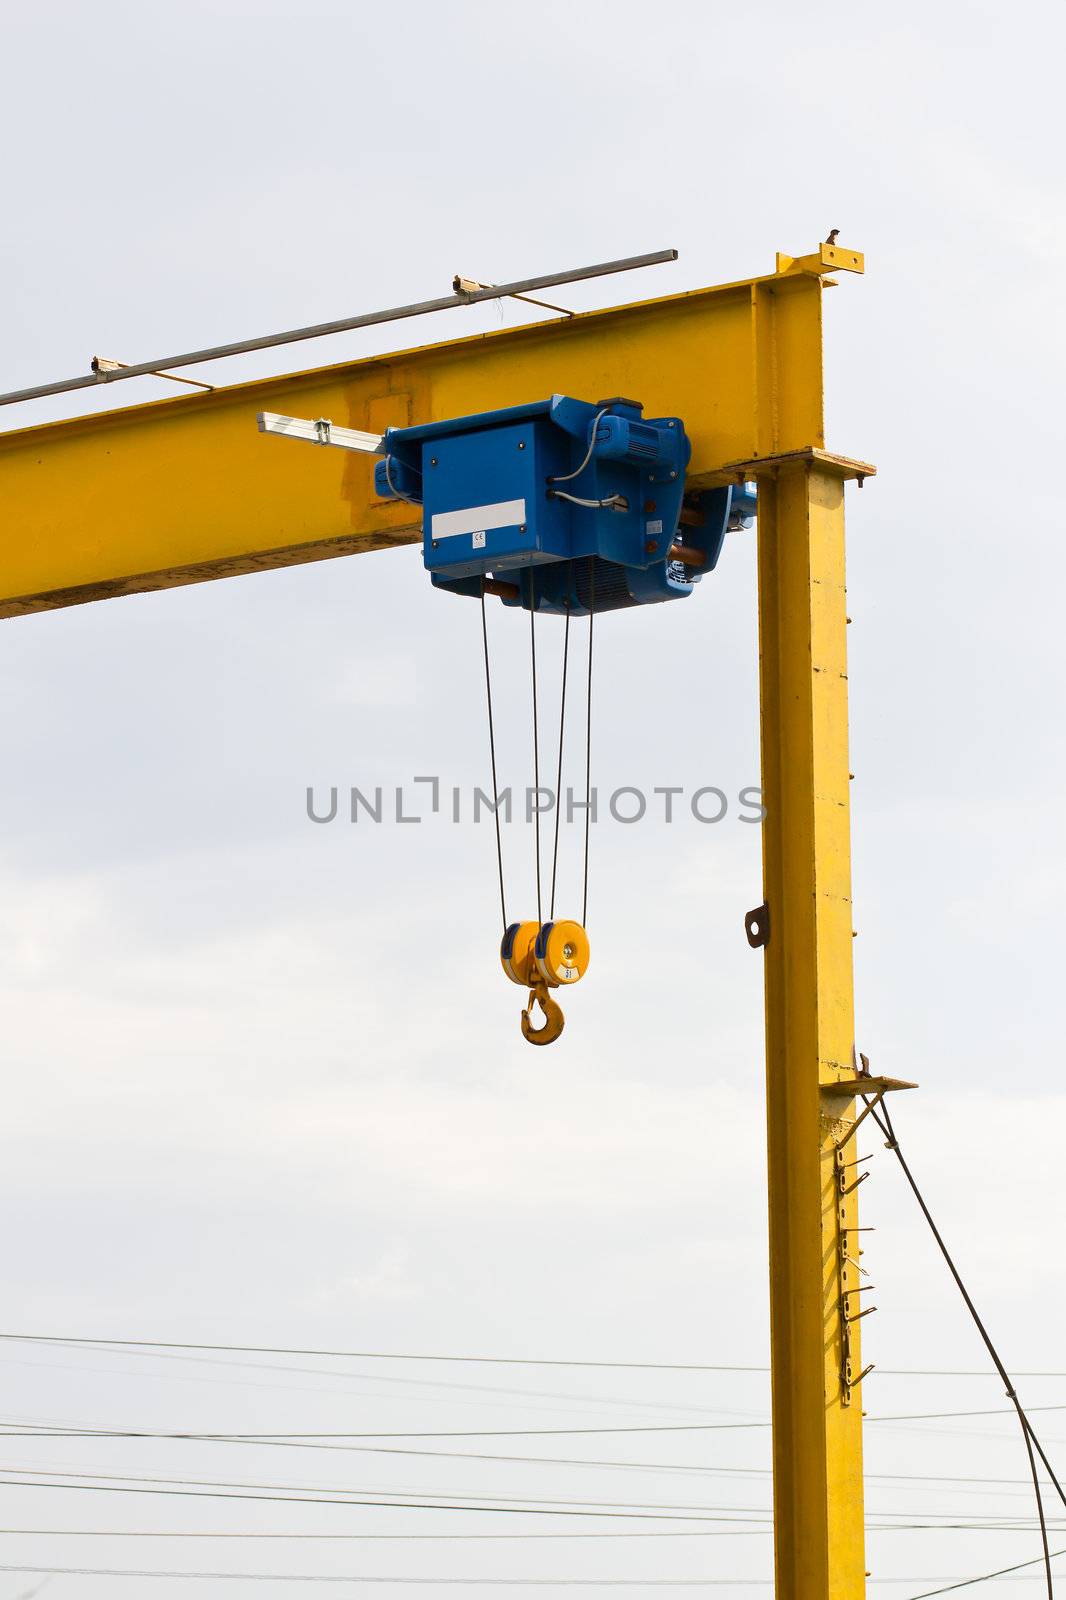 The hook of a construction crane against white background